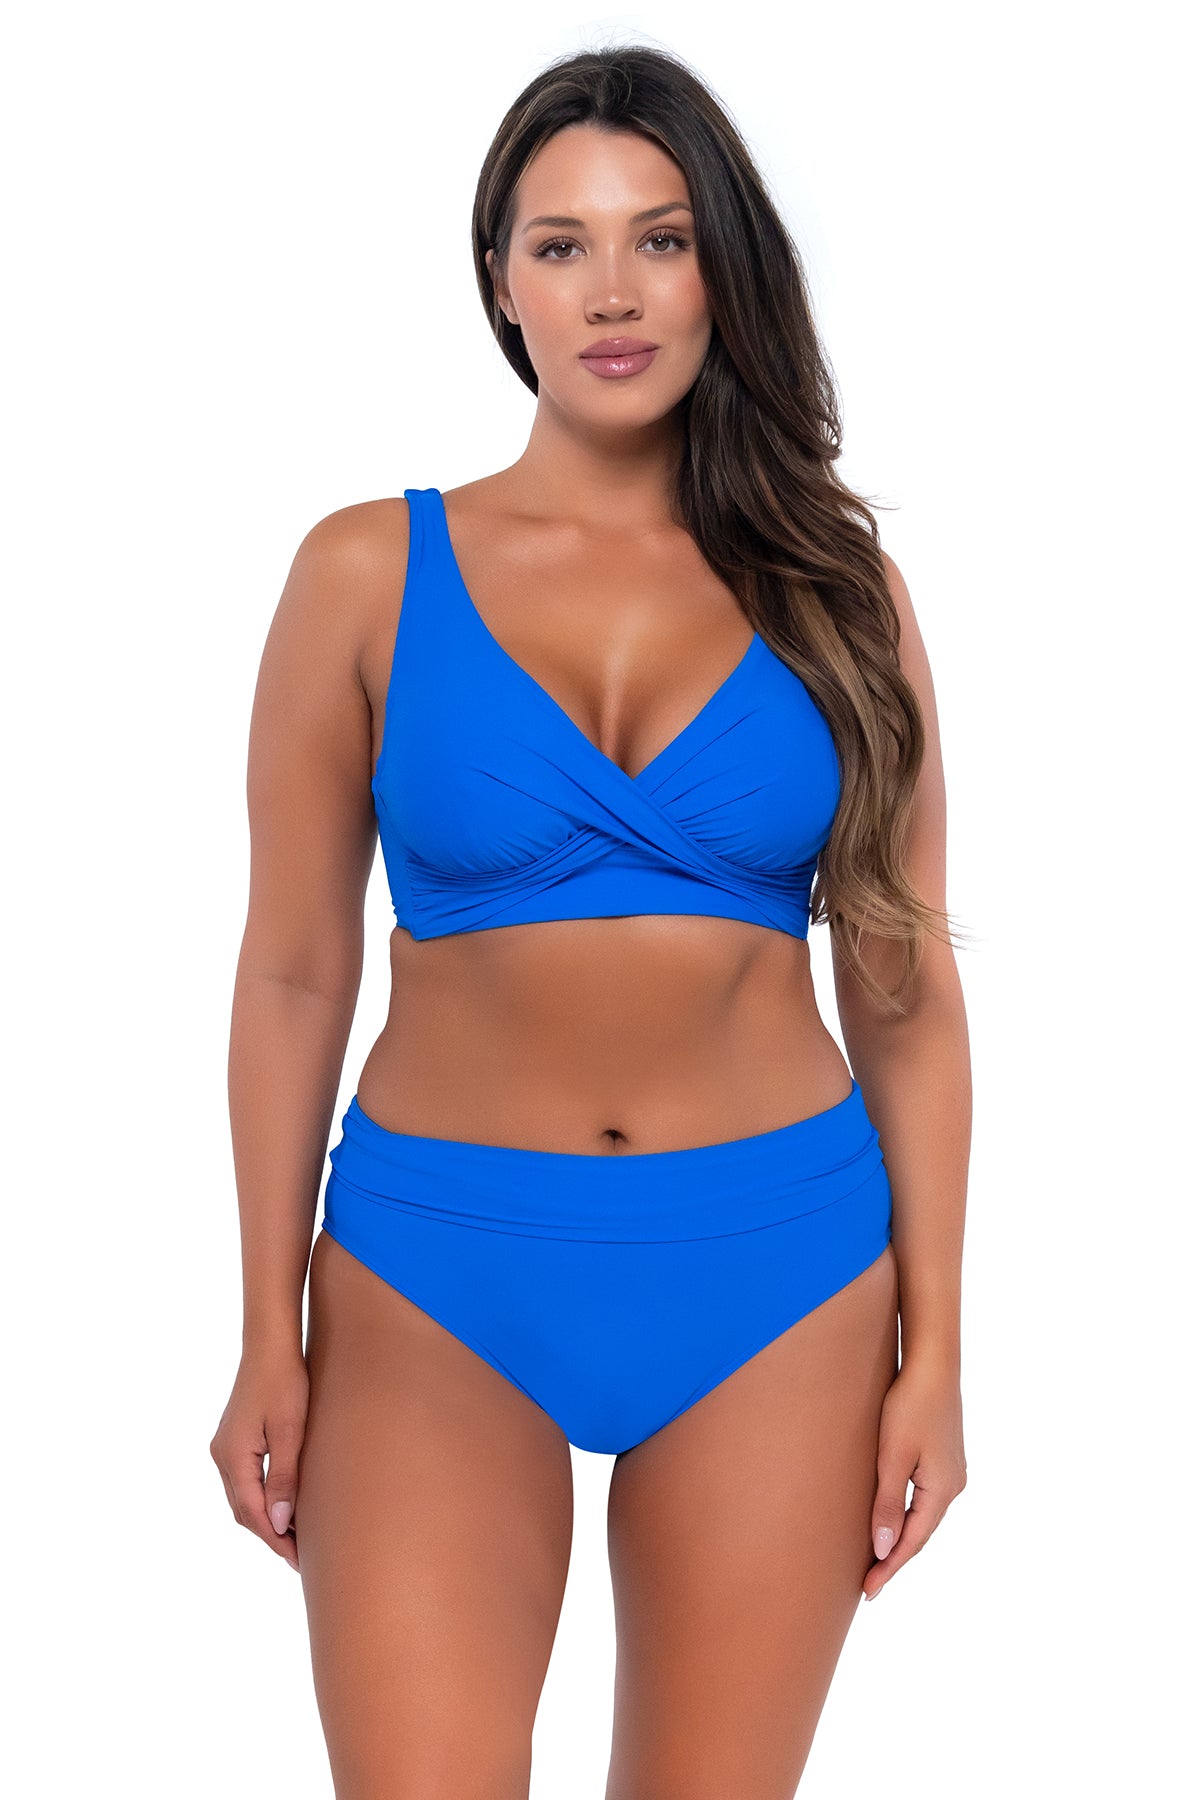 Front pose #1 of Nicky wearing Sunsets Electric Blue Hannah High Waist Bottom with matching Elsie Top underwire bikini